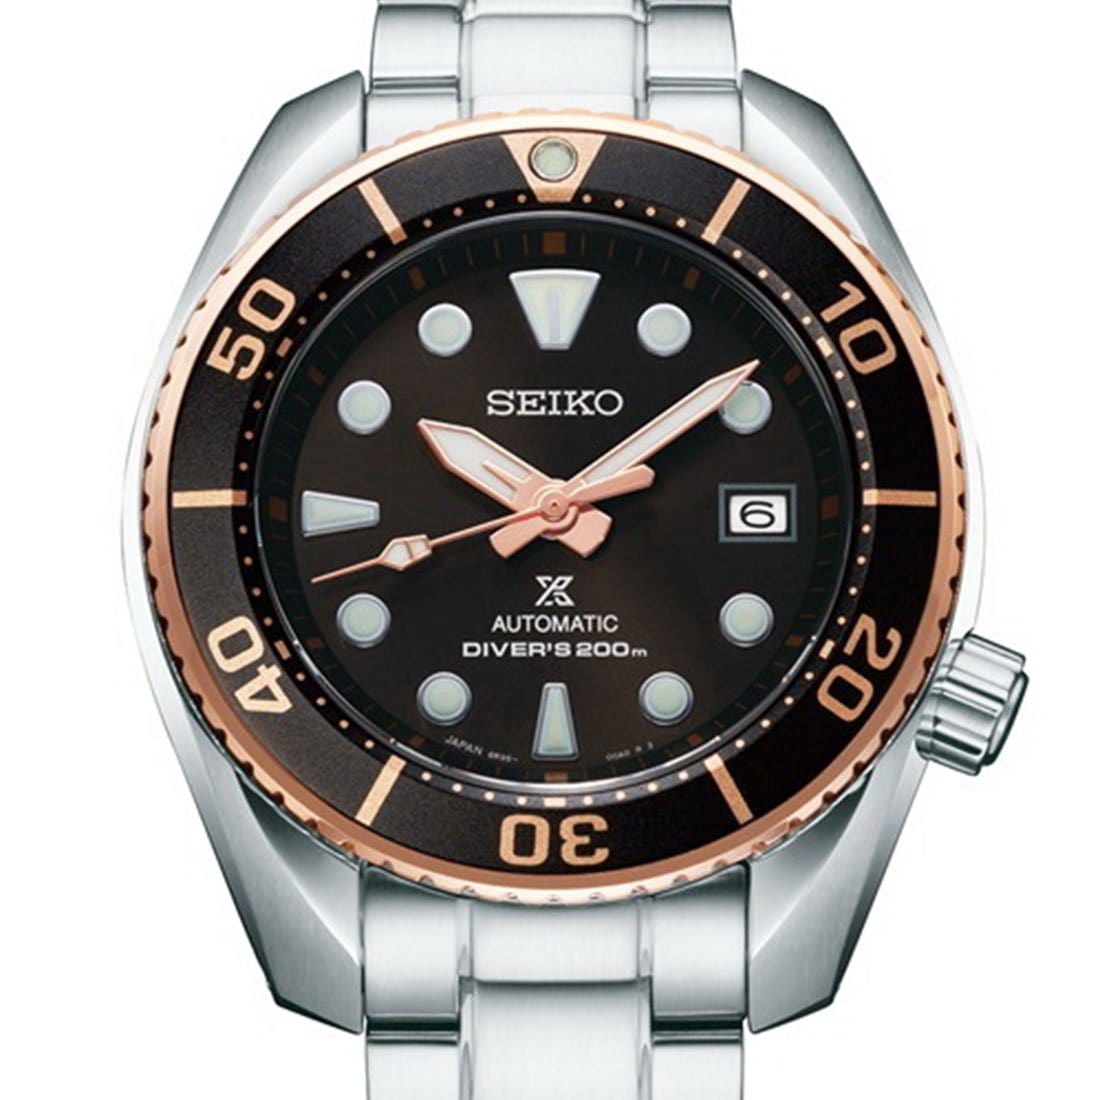 SBDC114 Seiko Prospex GINZA 2020 LImited Edition Automatic Divers 200M JDM Watch